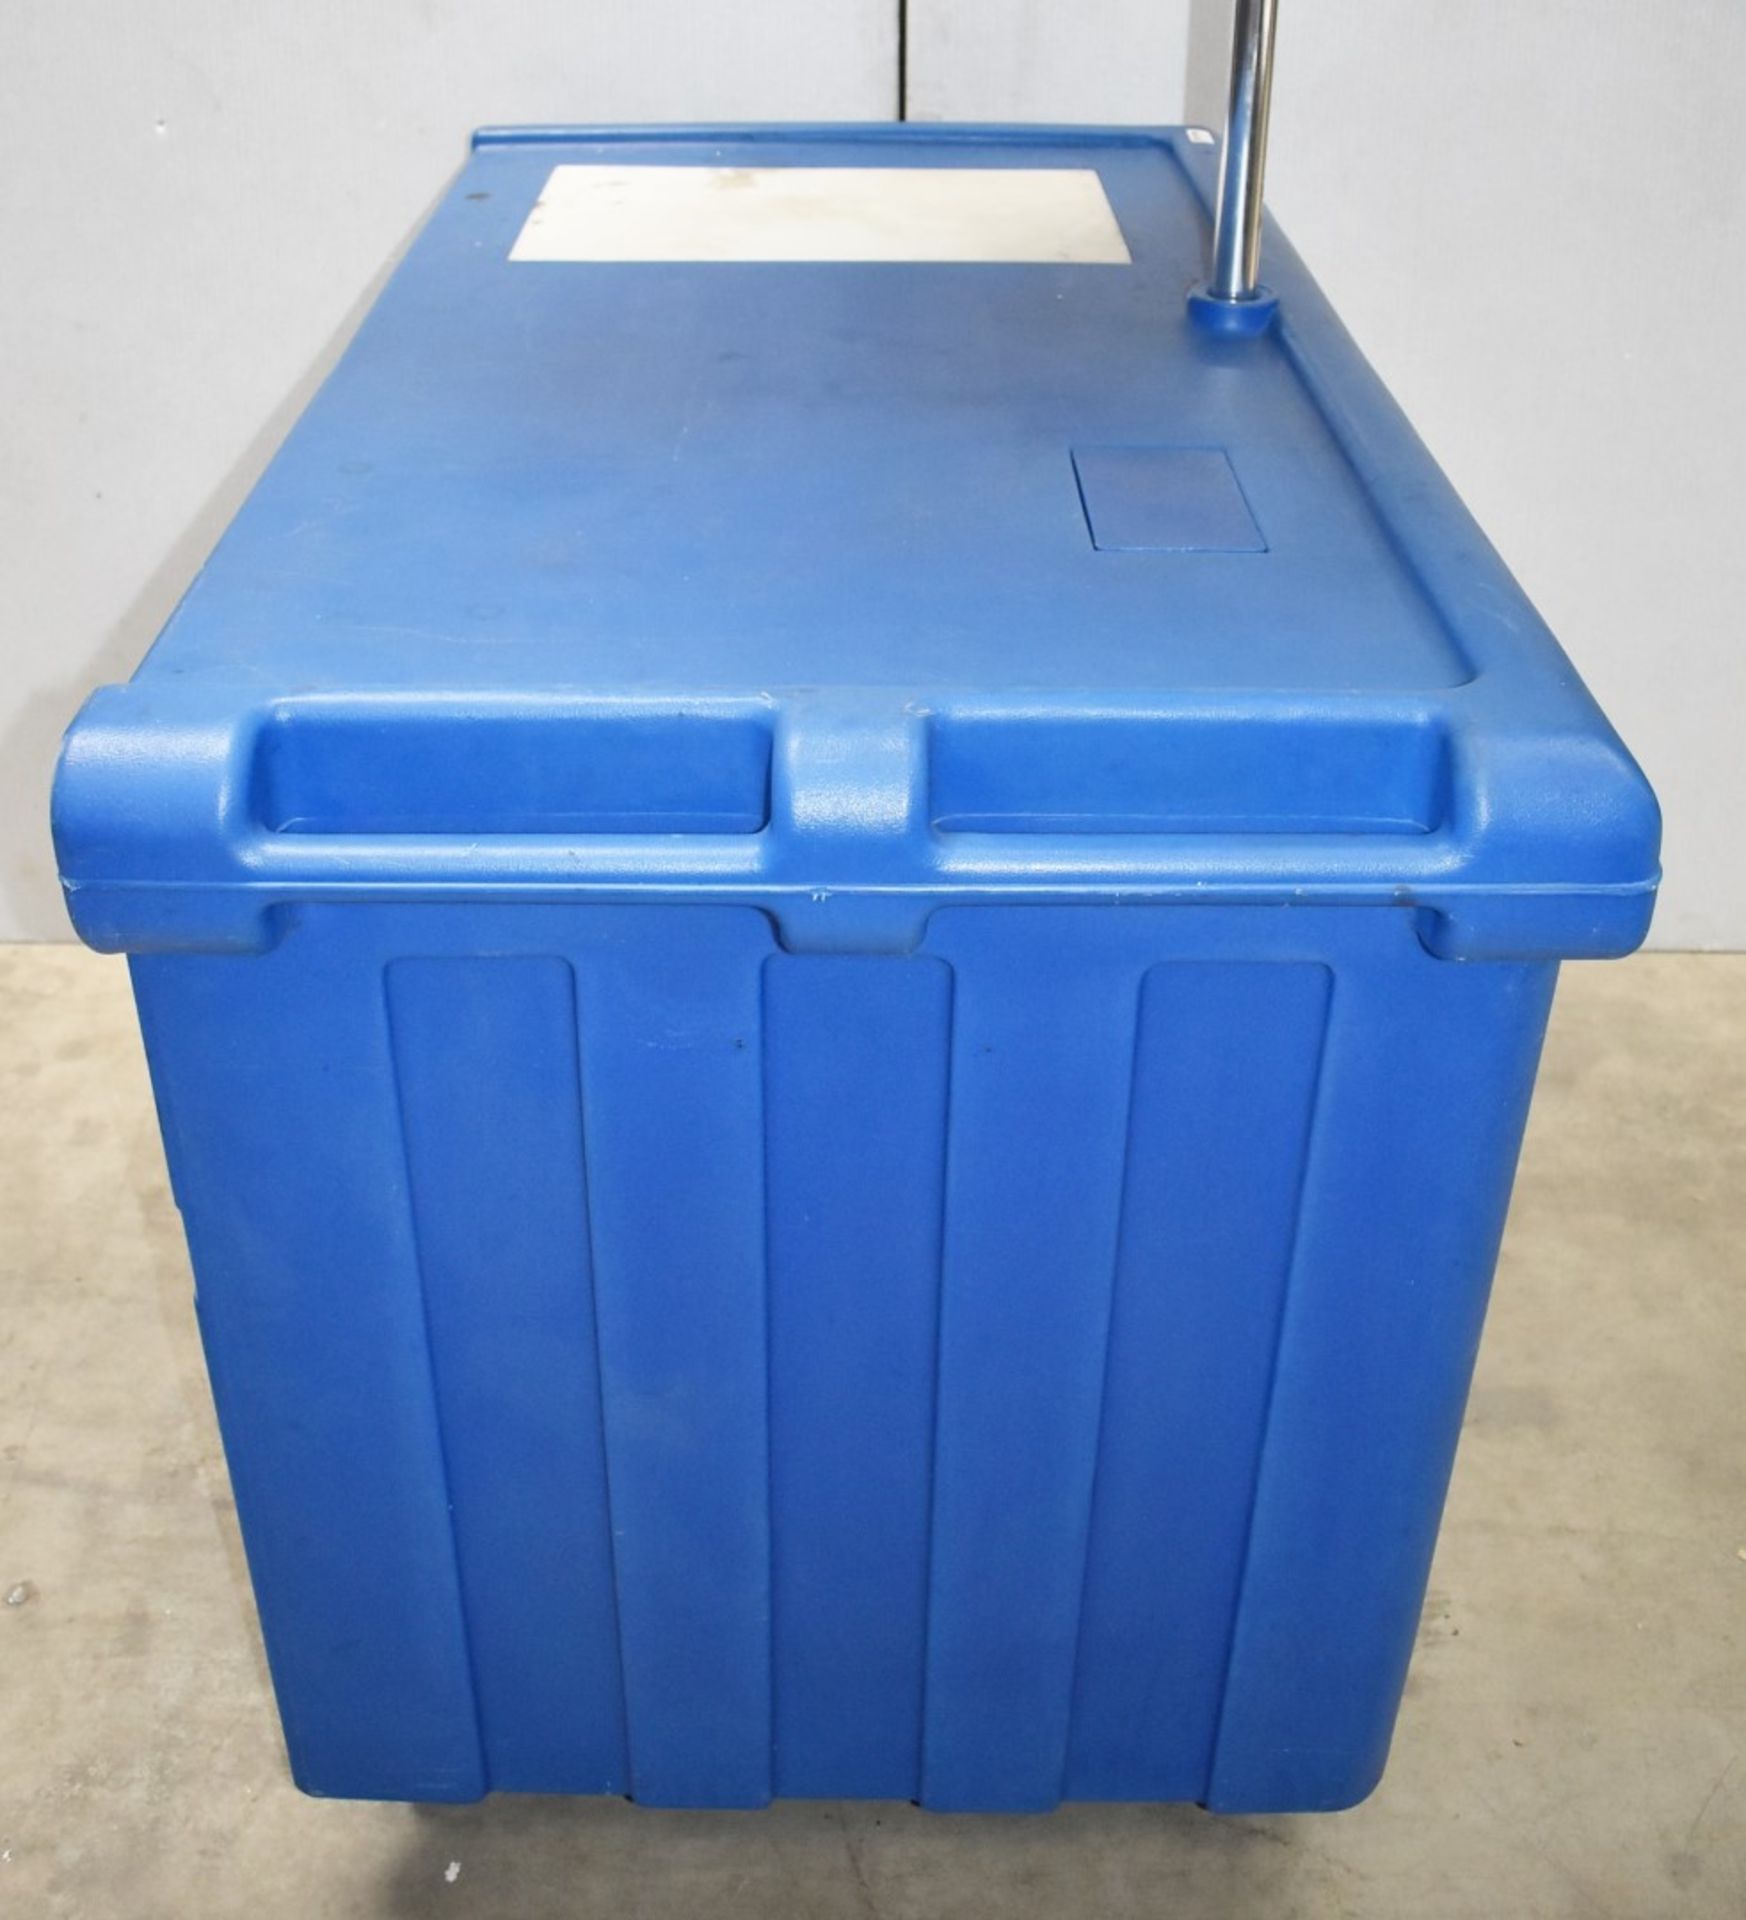 1 x Cambro Mobile BBQ Food Station With Parasol - Lightweight Plastic Design With Storage - Image 8 of 14